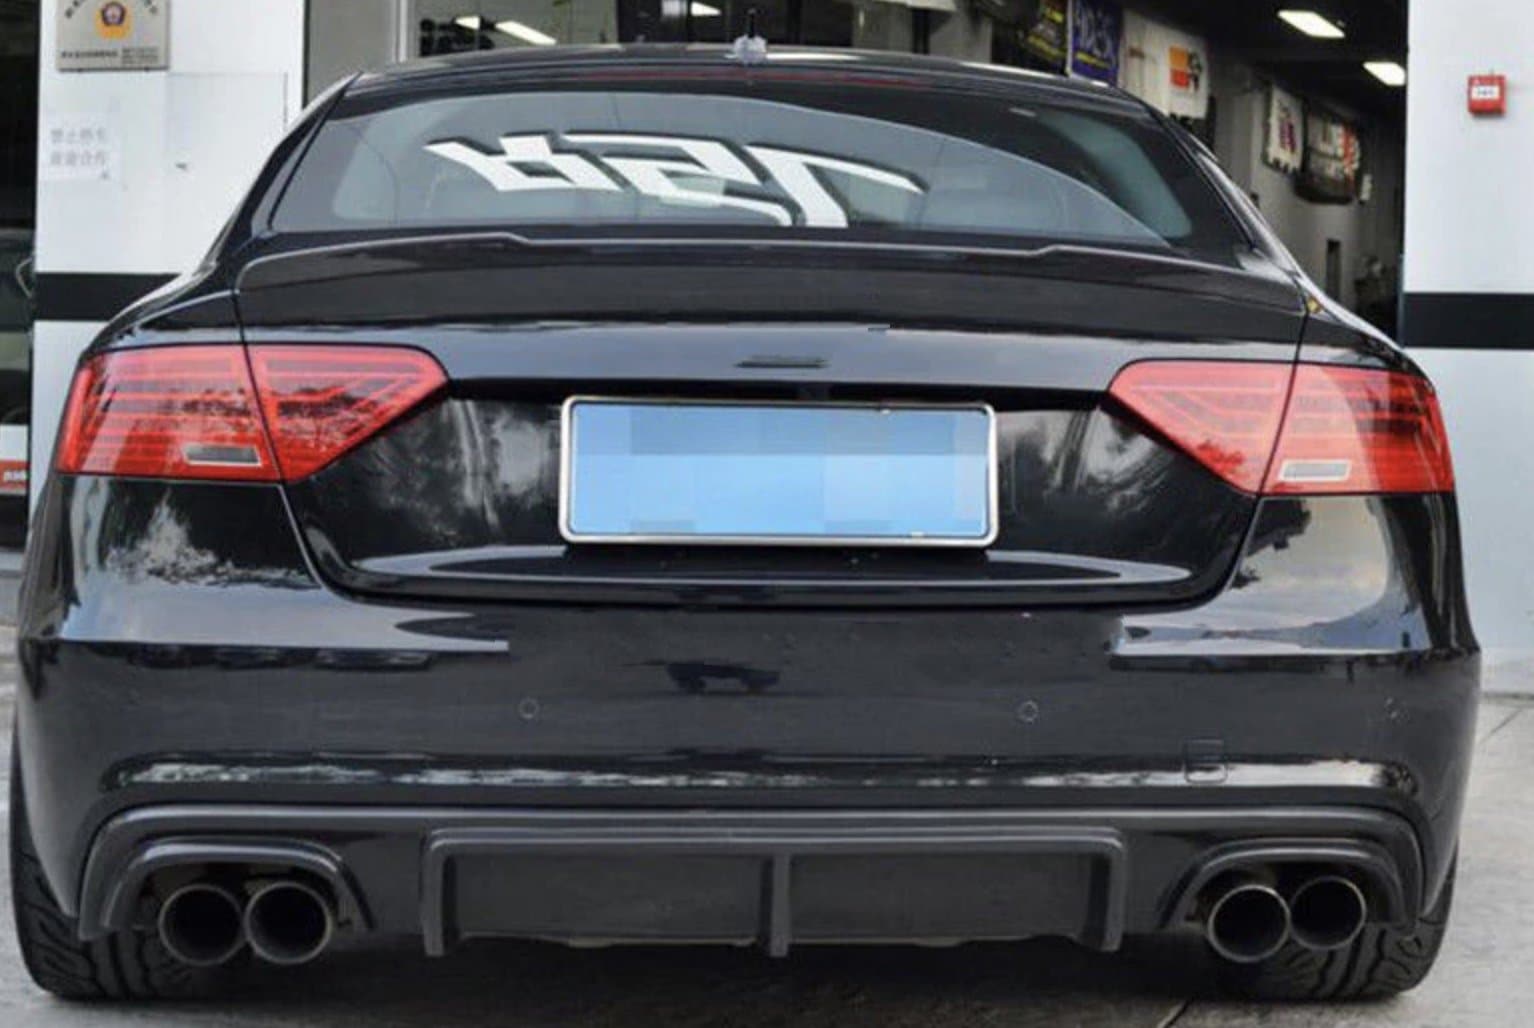 Audi A5/S5 B8.5 S Line Ducktail Carbon Fibre Rear Lip Spoiler for the Audi S5 A5 S Line Sportback 4 Door Models only. This product is manufactured from 2*2 Carbon Fibre weave and is designed to sit perfectly on the rear trunk of the Audi S5 A5 S Line Sportback models. 